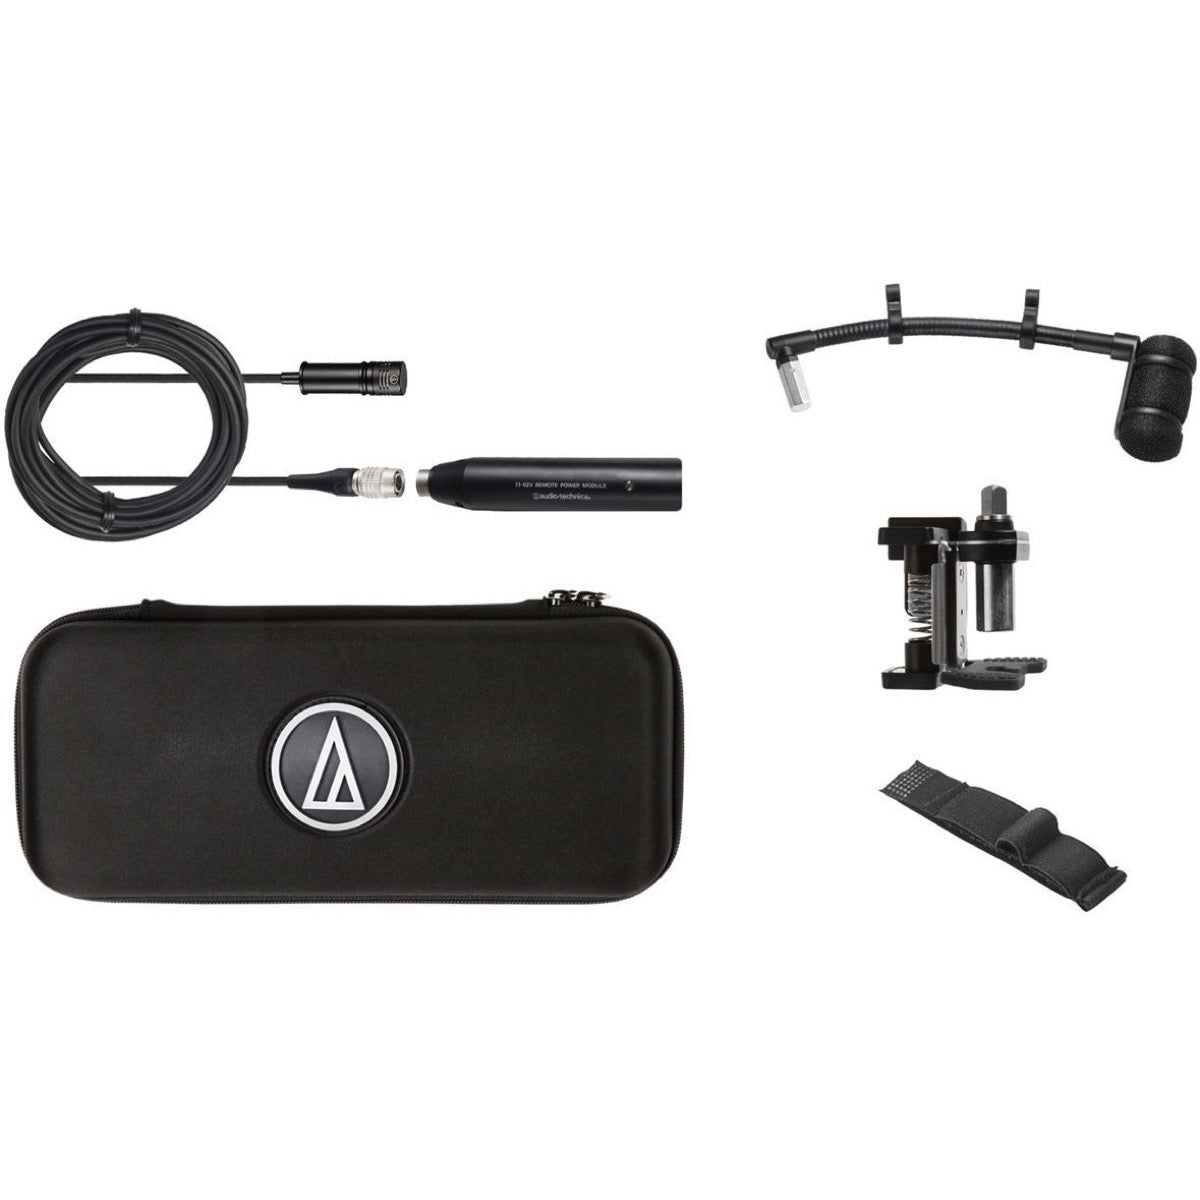 Audio-Technica ATM350D Condenser Microphone with Drum Mounting System